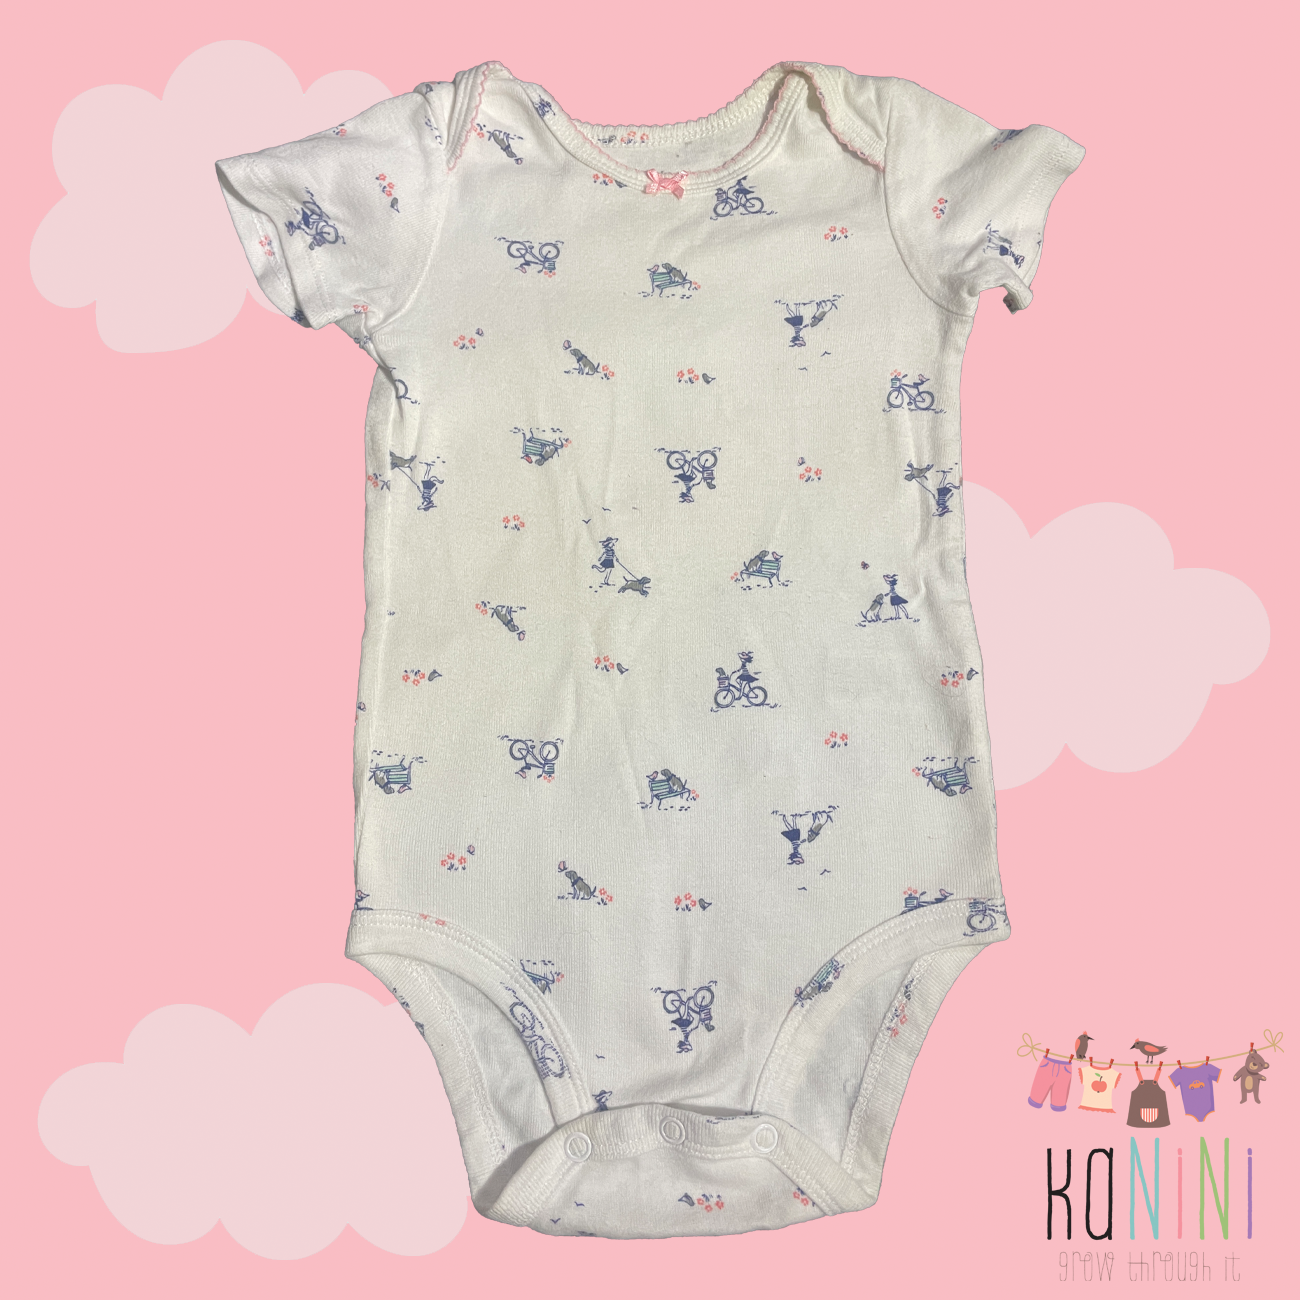 Featured image for “Carter's 18 Months Girls Short Sleeve Romper”